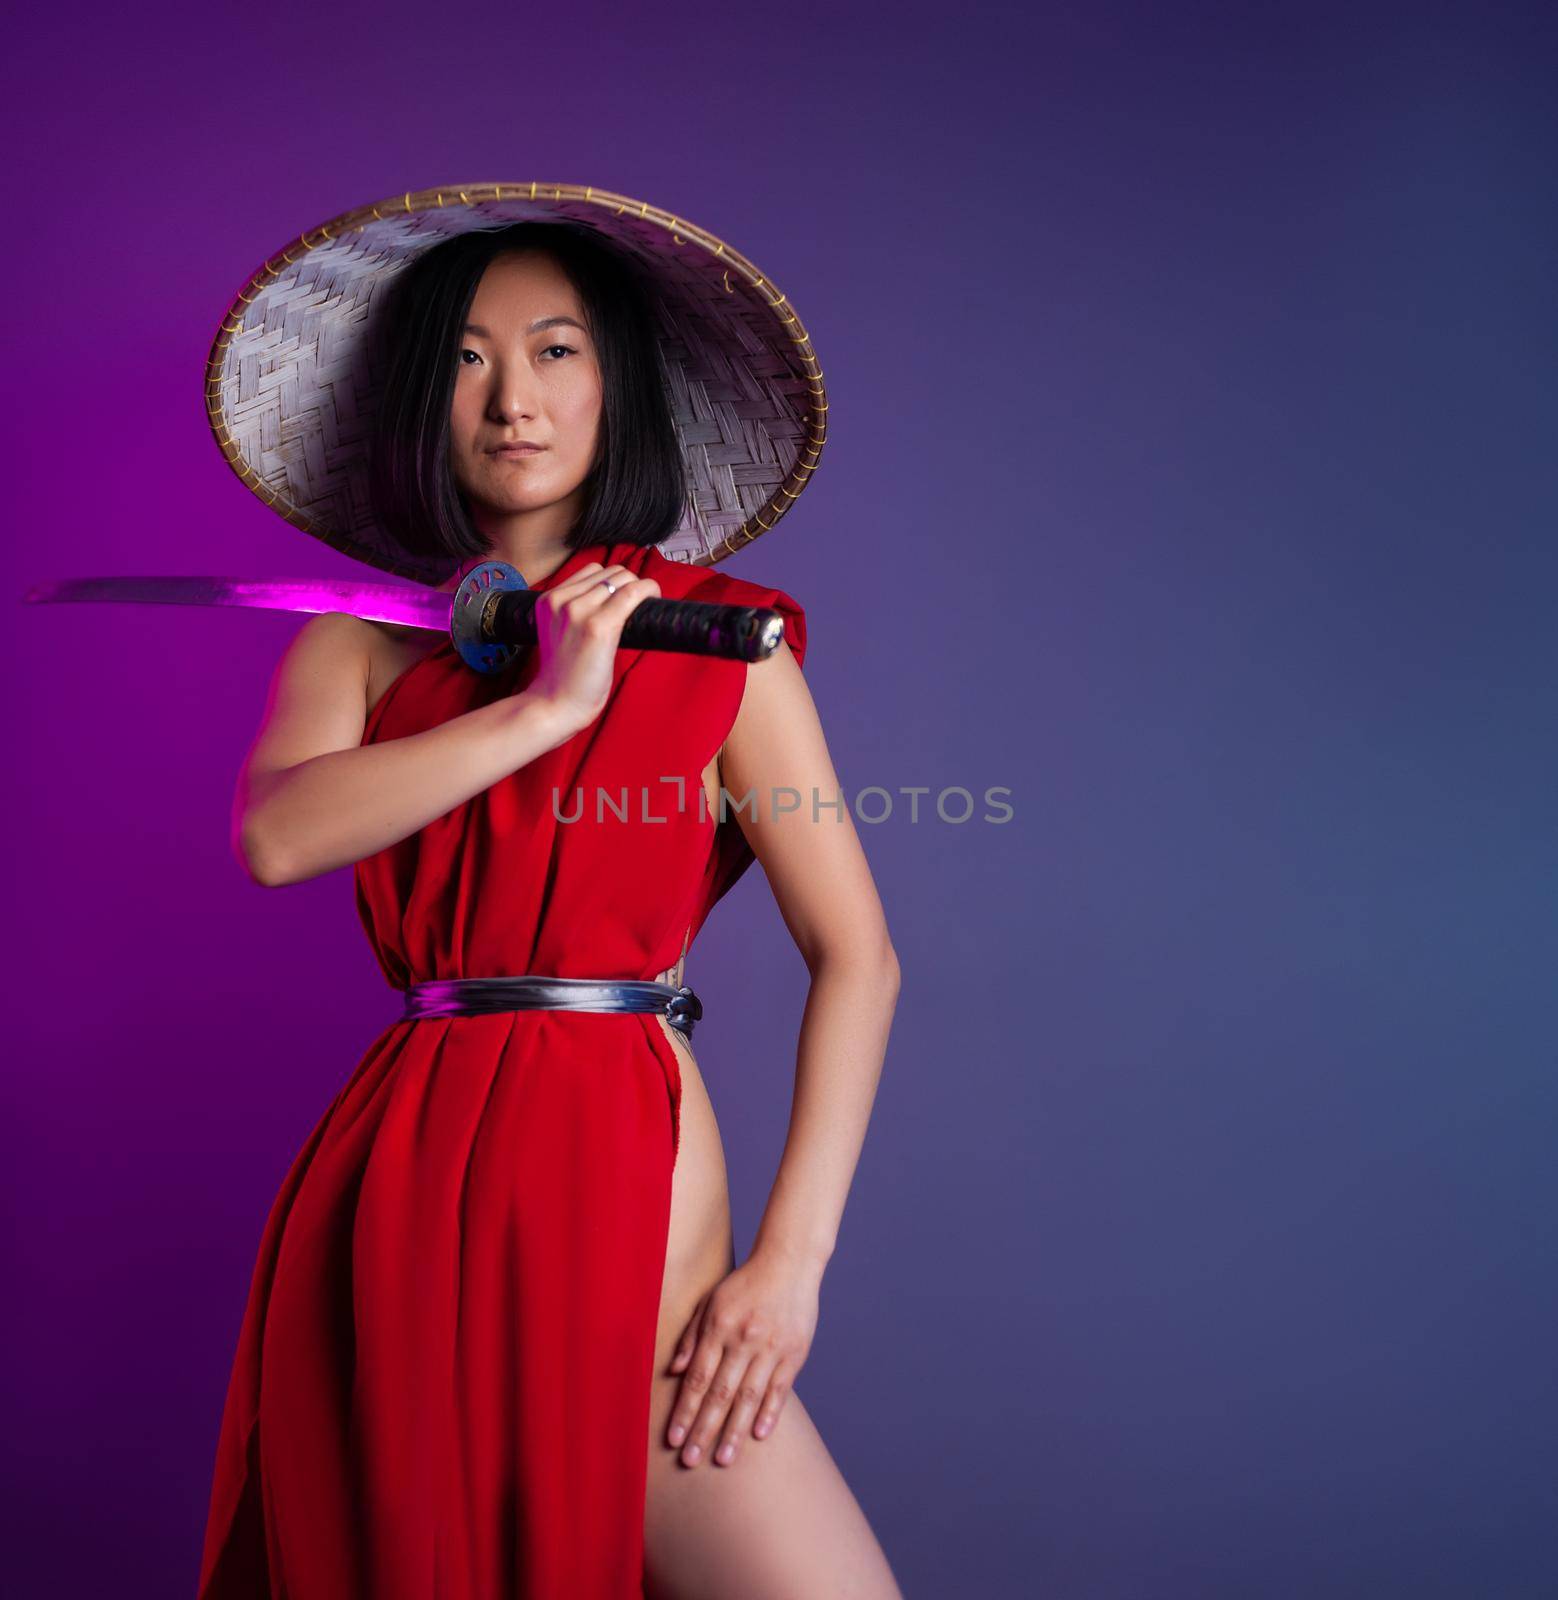 the portrait of an Asian woman in a red cape and an Asian hat with a katana in her hand image of a samurai